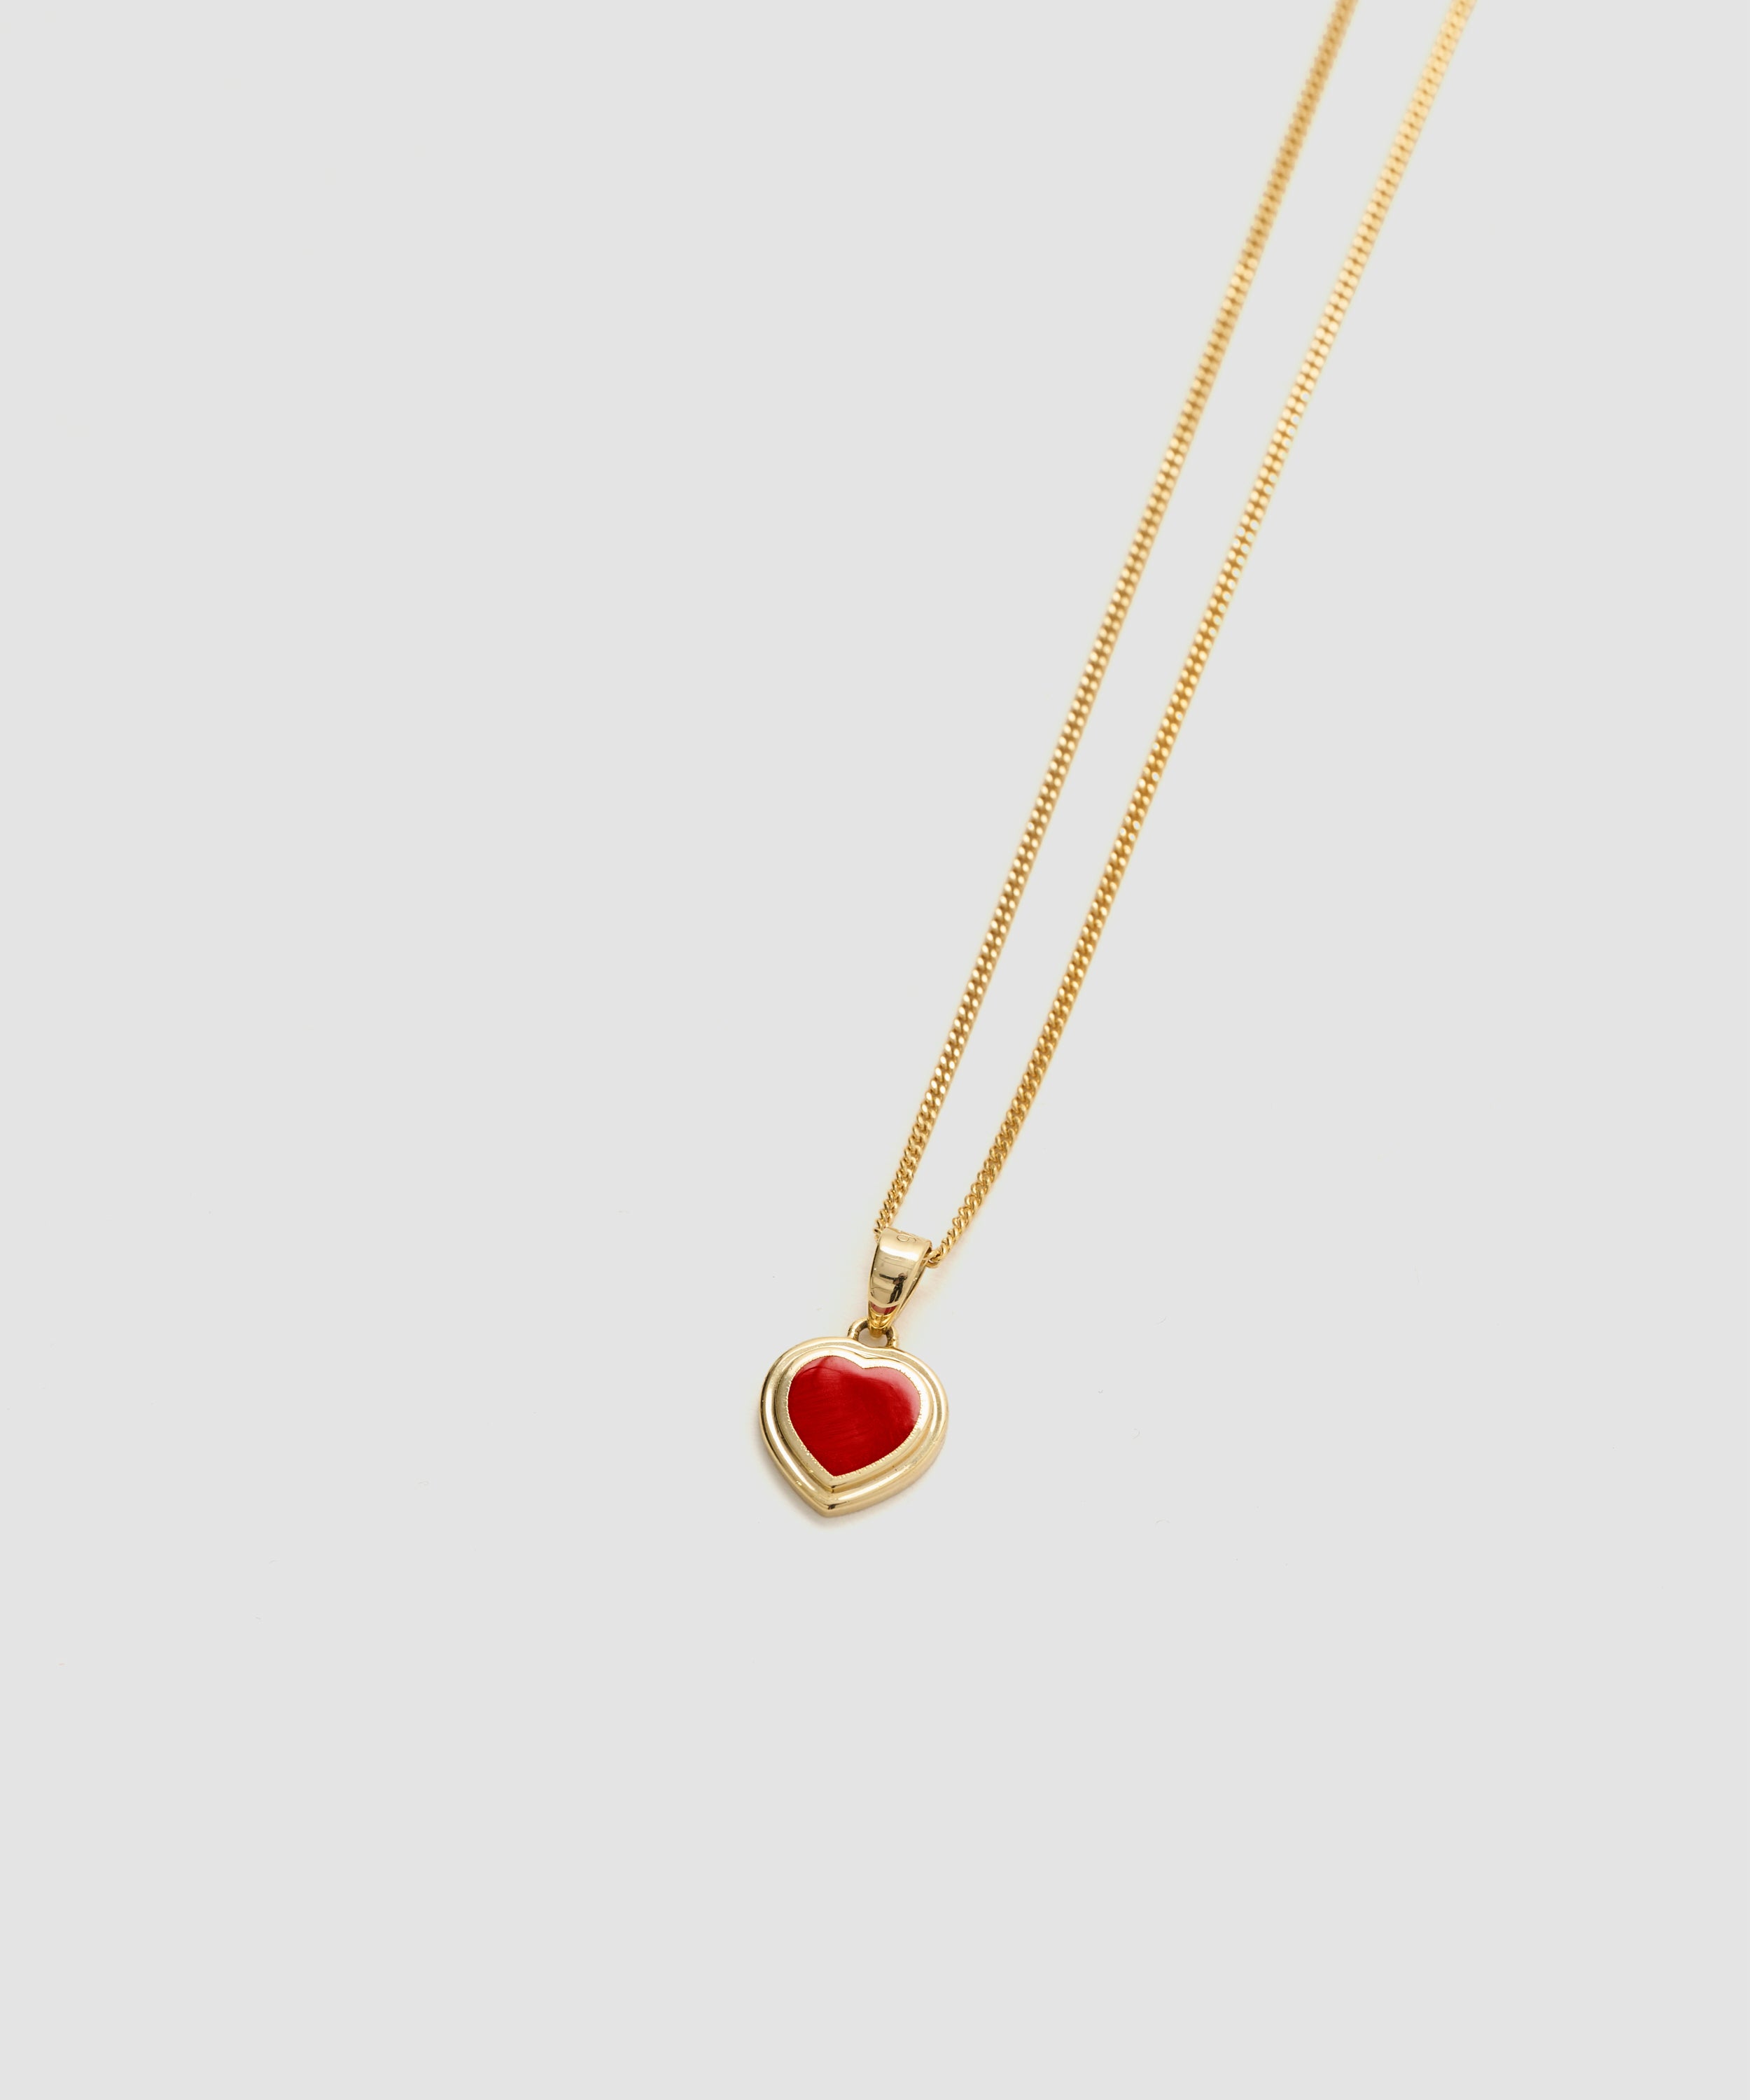 HEART NECKLACE GOLD PLATING